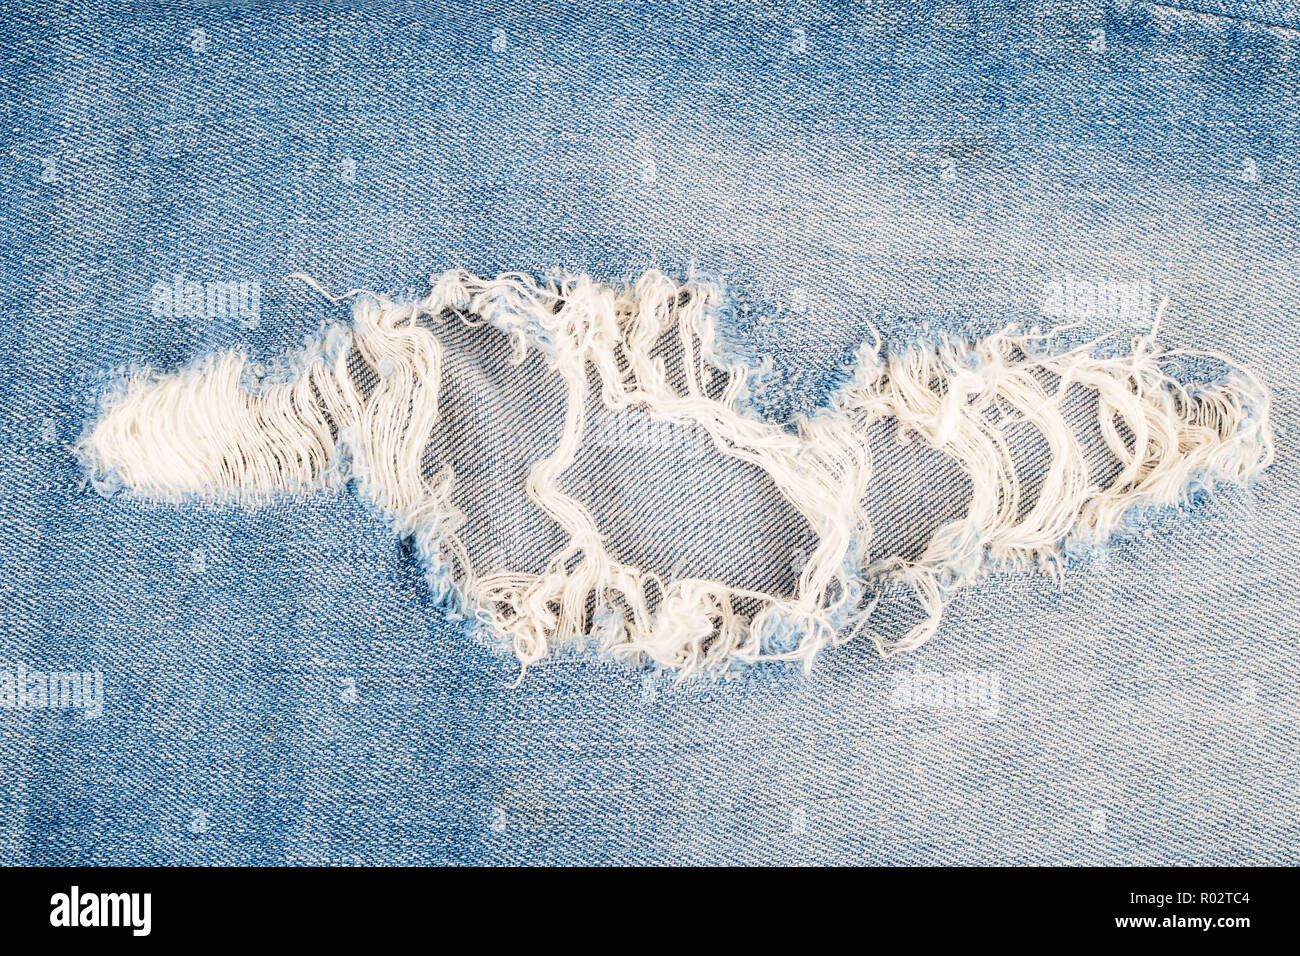 Ripped blue jeans texture background Stock Photo - Alamy